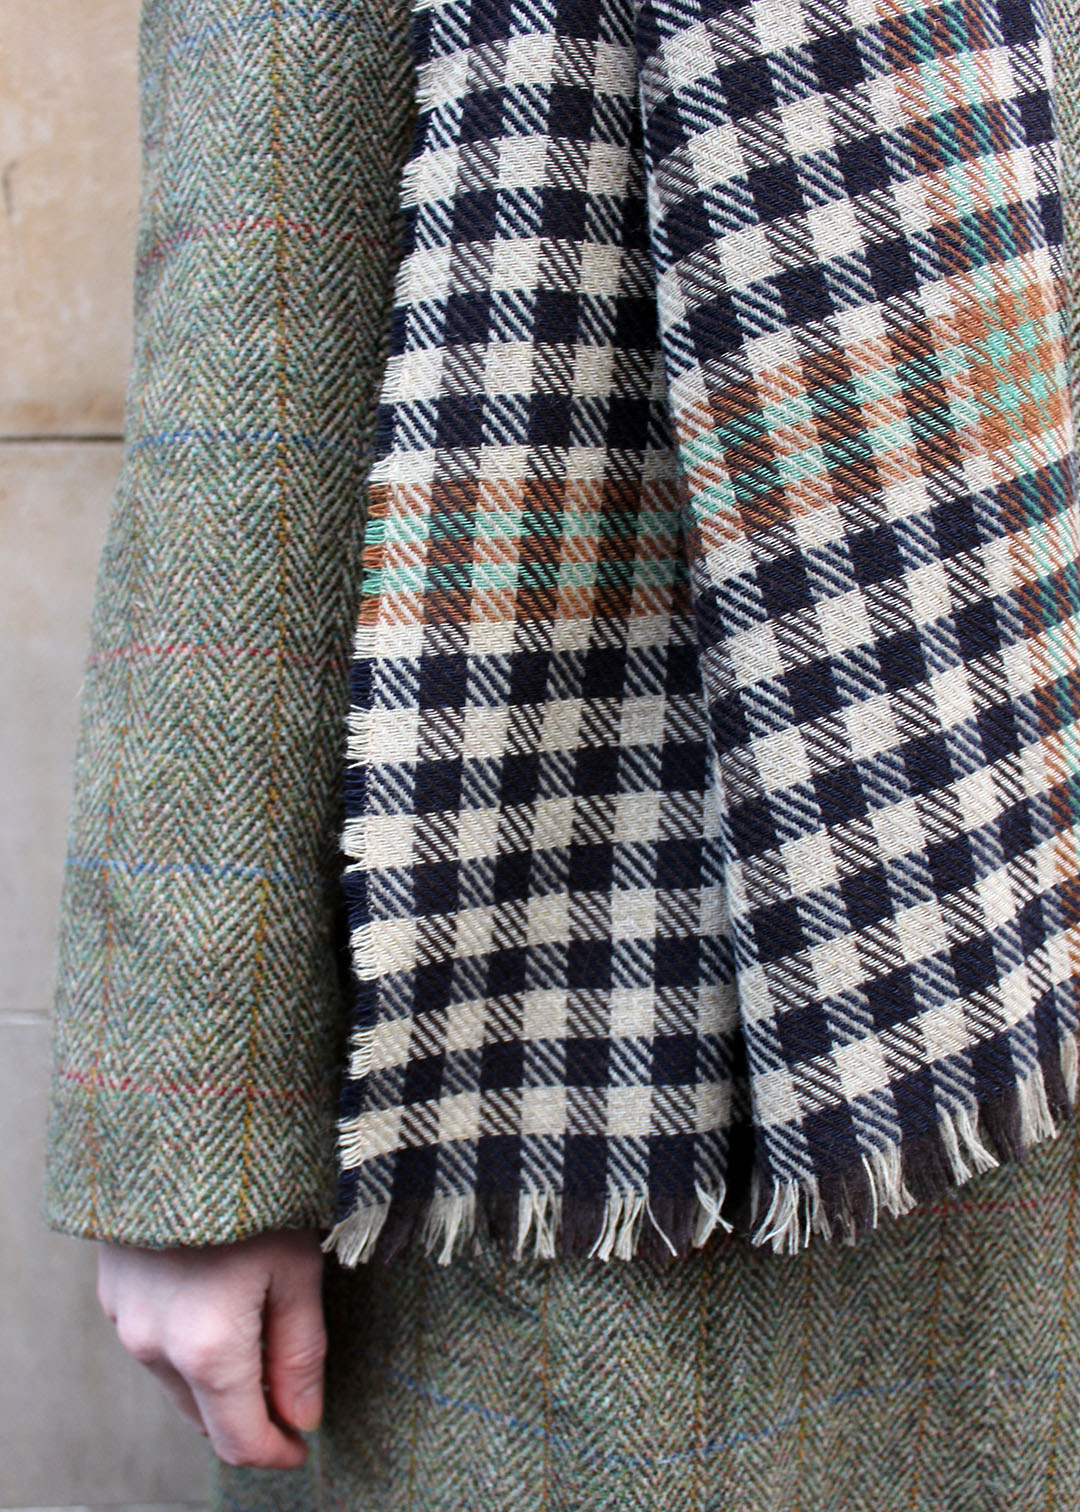 Brock lambswool and cashmere stole in black, rust, camel and lime green check.